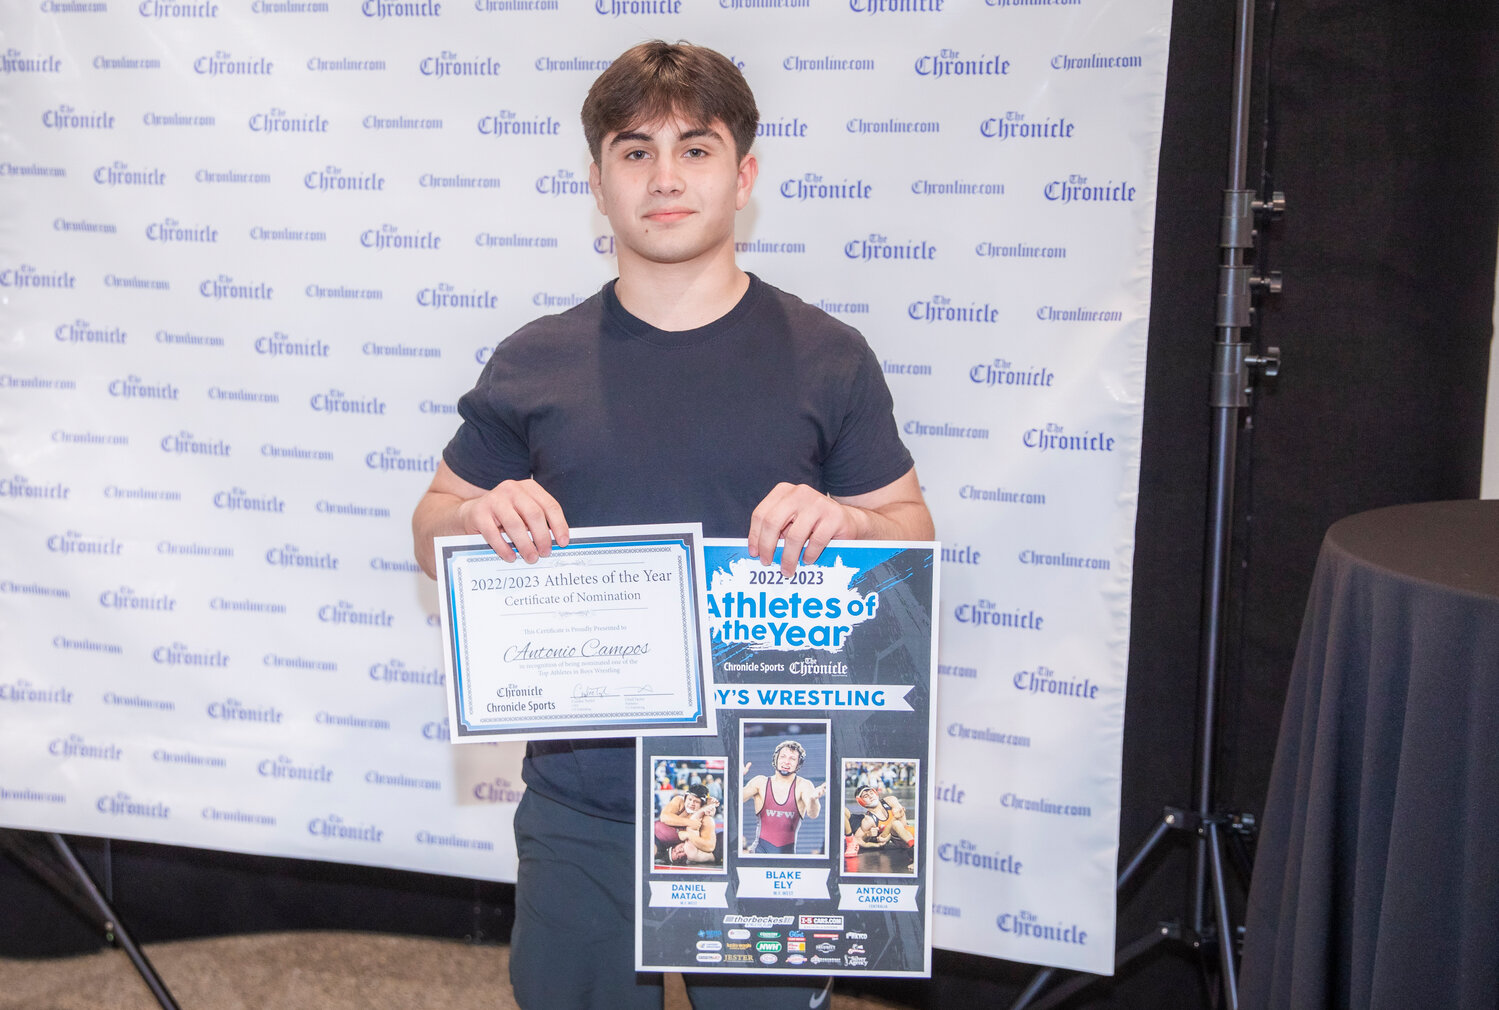 Centralia wrestler Antonio Campos poses for a photo Tuesday evening during the “Athletes of the Year” banquet at the Jester Auto Museum. The Tiger had another strong season, getting all the way to the state title match at 120 pounds to finish second in the state.